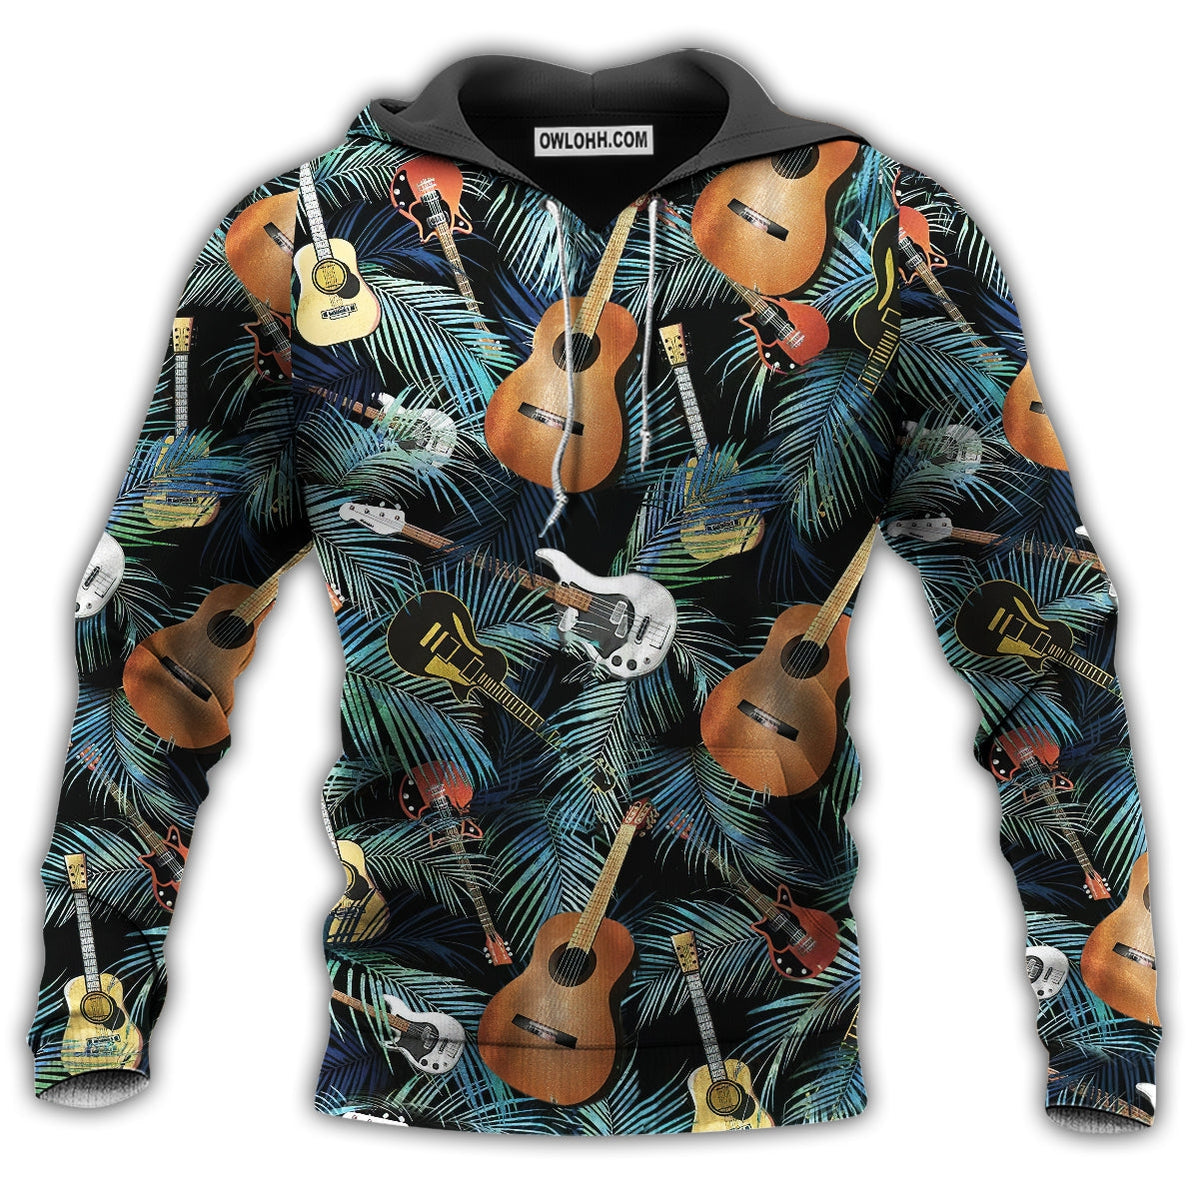 Guitar Music Guitar Love Life Style - Hoodie - Owl Ohh - Owl Ohh